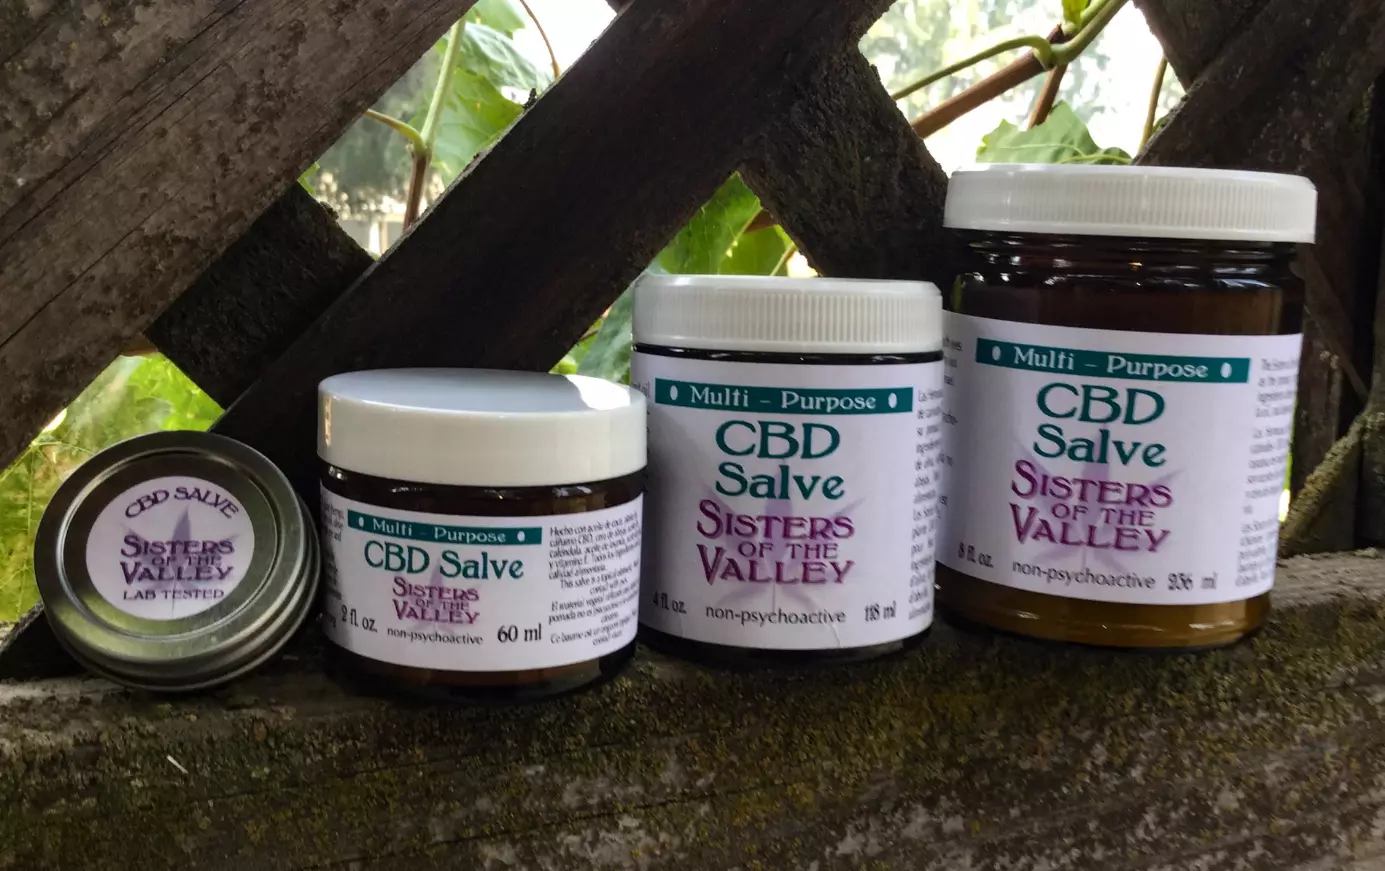 The sisters' CBD products.